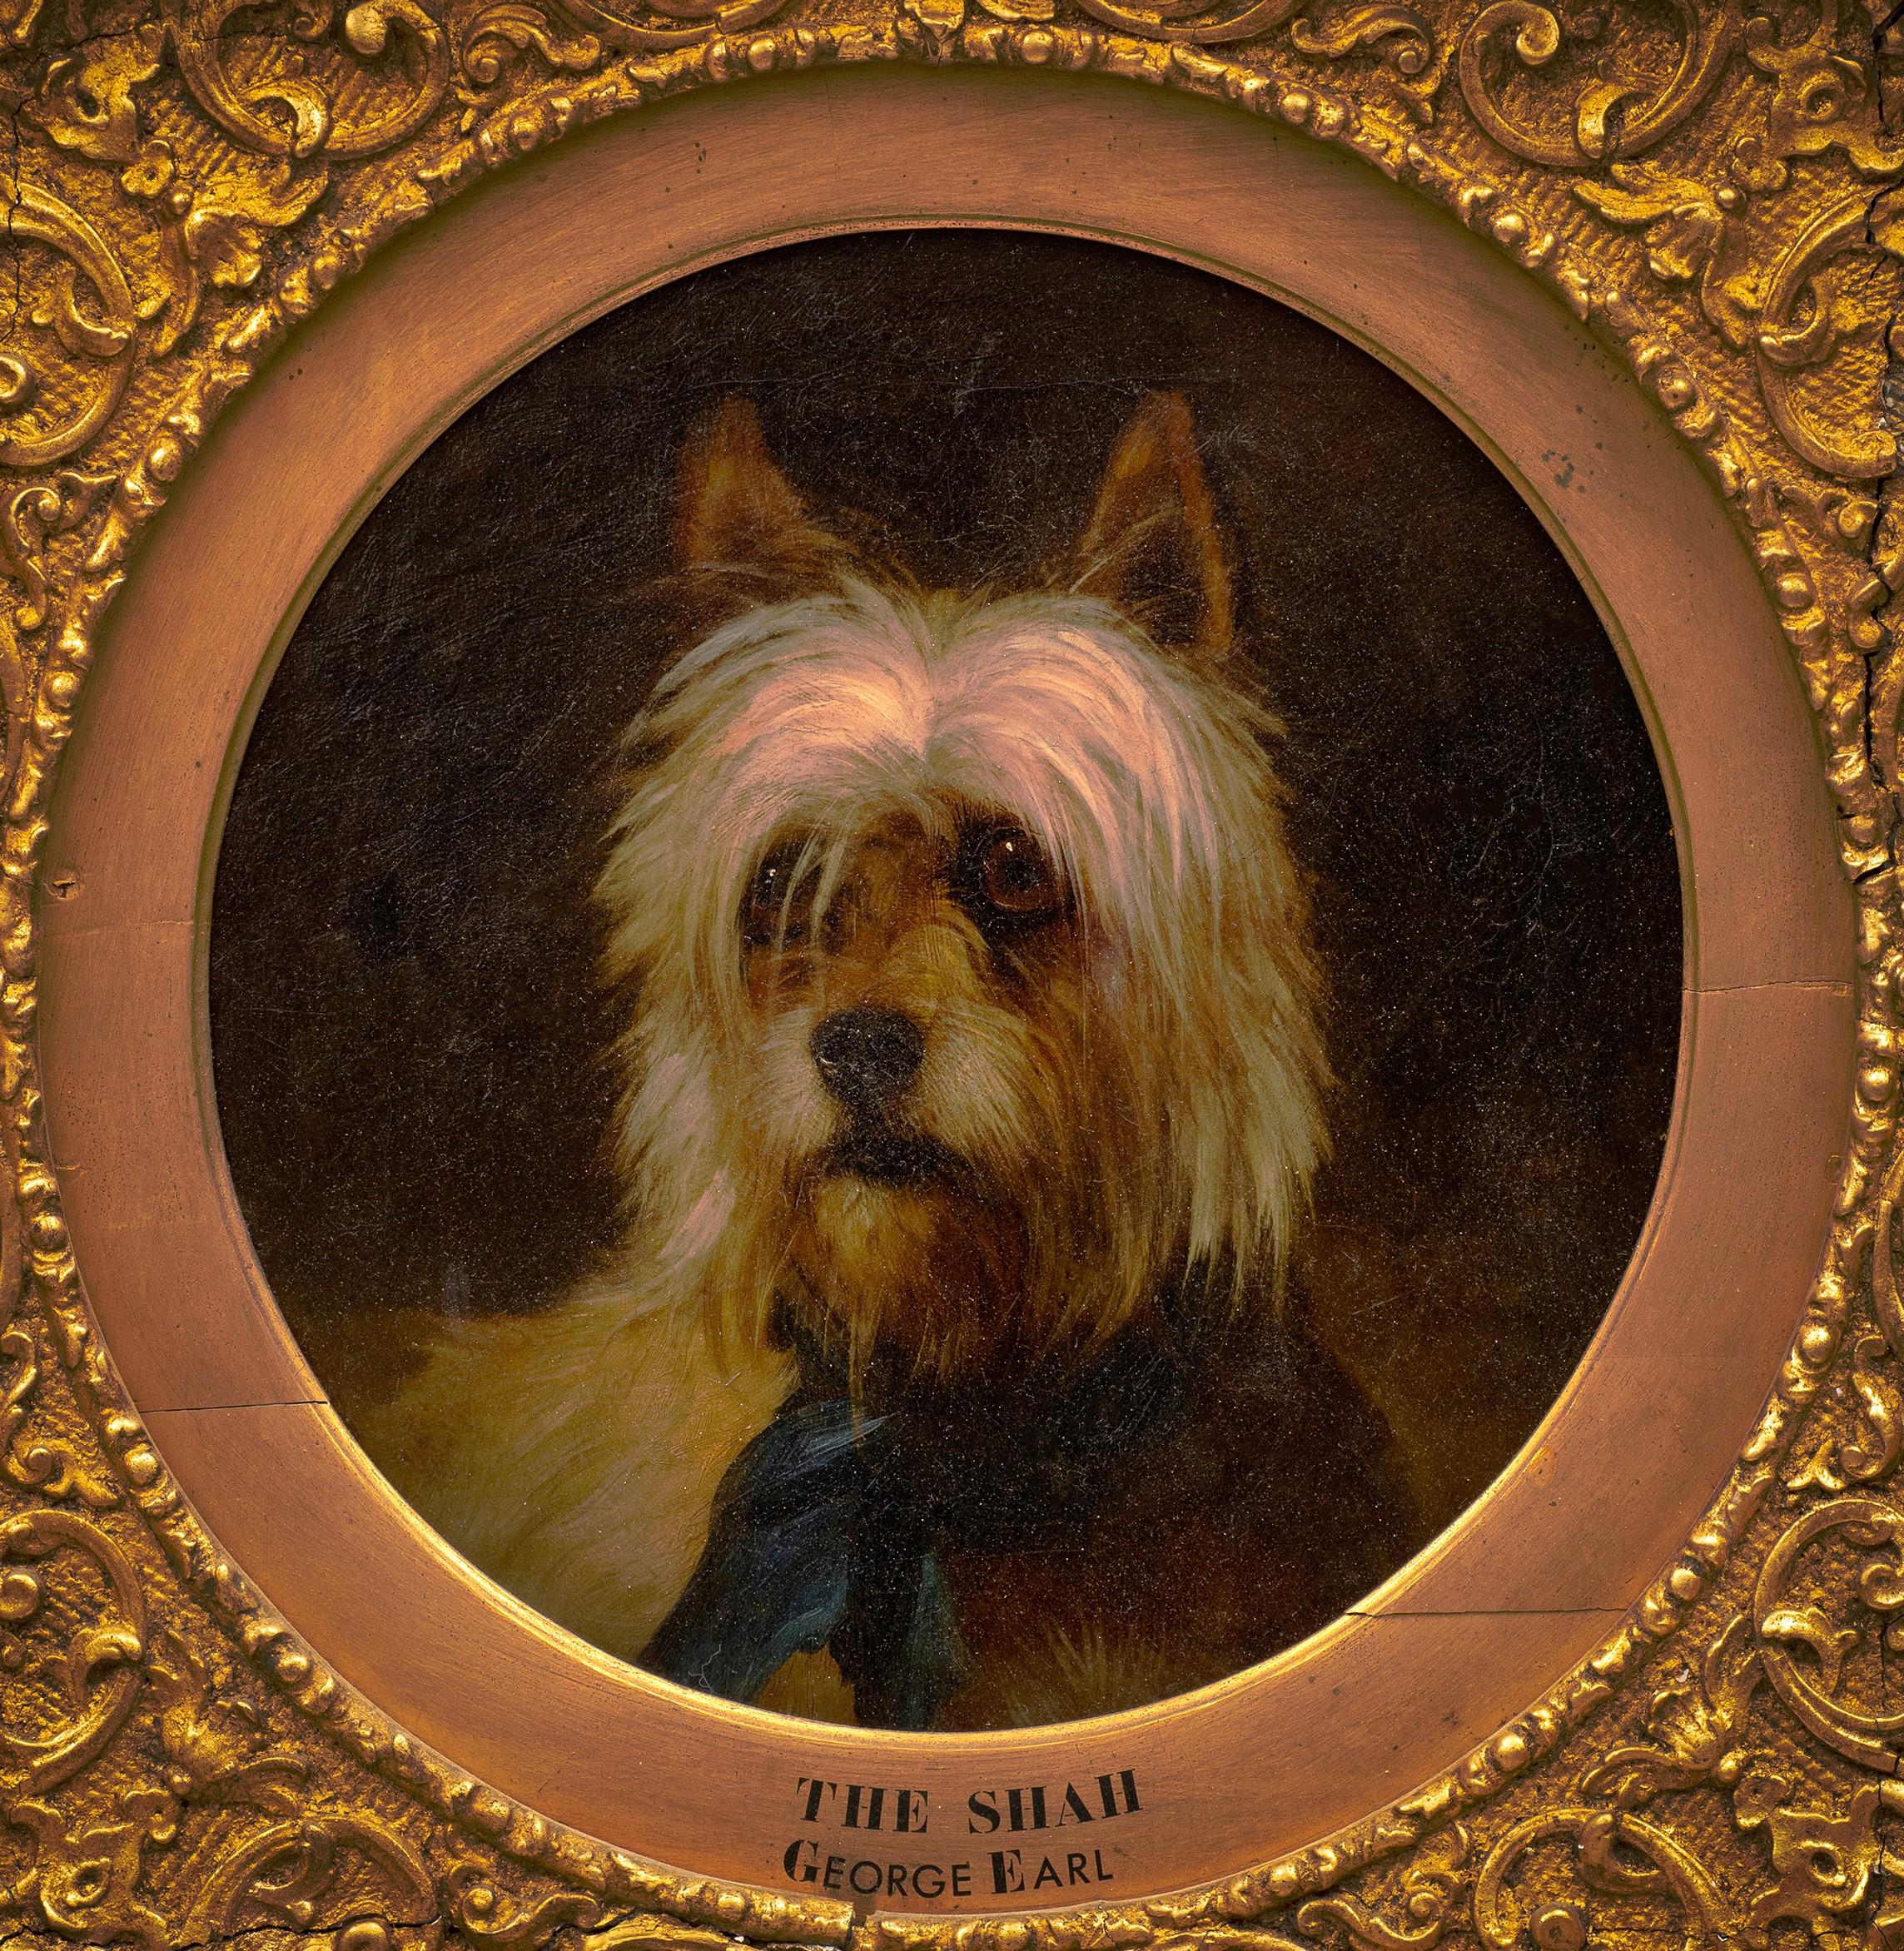 Antique Dog Painting of a Terrier: “The Shah” 
George Earl (England, 1824-1908)
Circa 1870
Oil on canvas.
12 ¾ x 12 ¾ (21 x 21 frame) inches.
Original ornate gilt stucco frame.

Superb animal painting by George Earl, a great specialist in the genre.